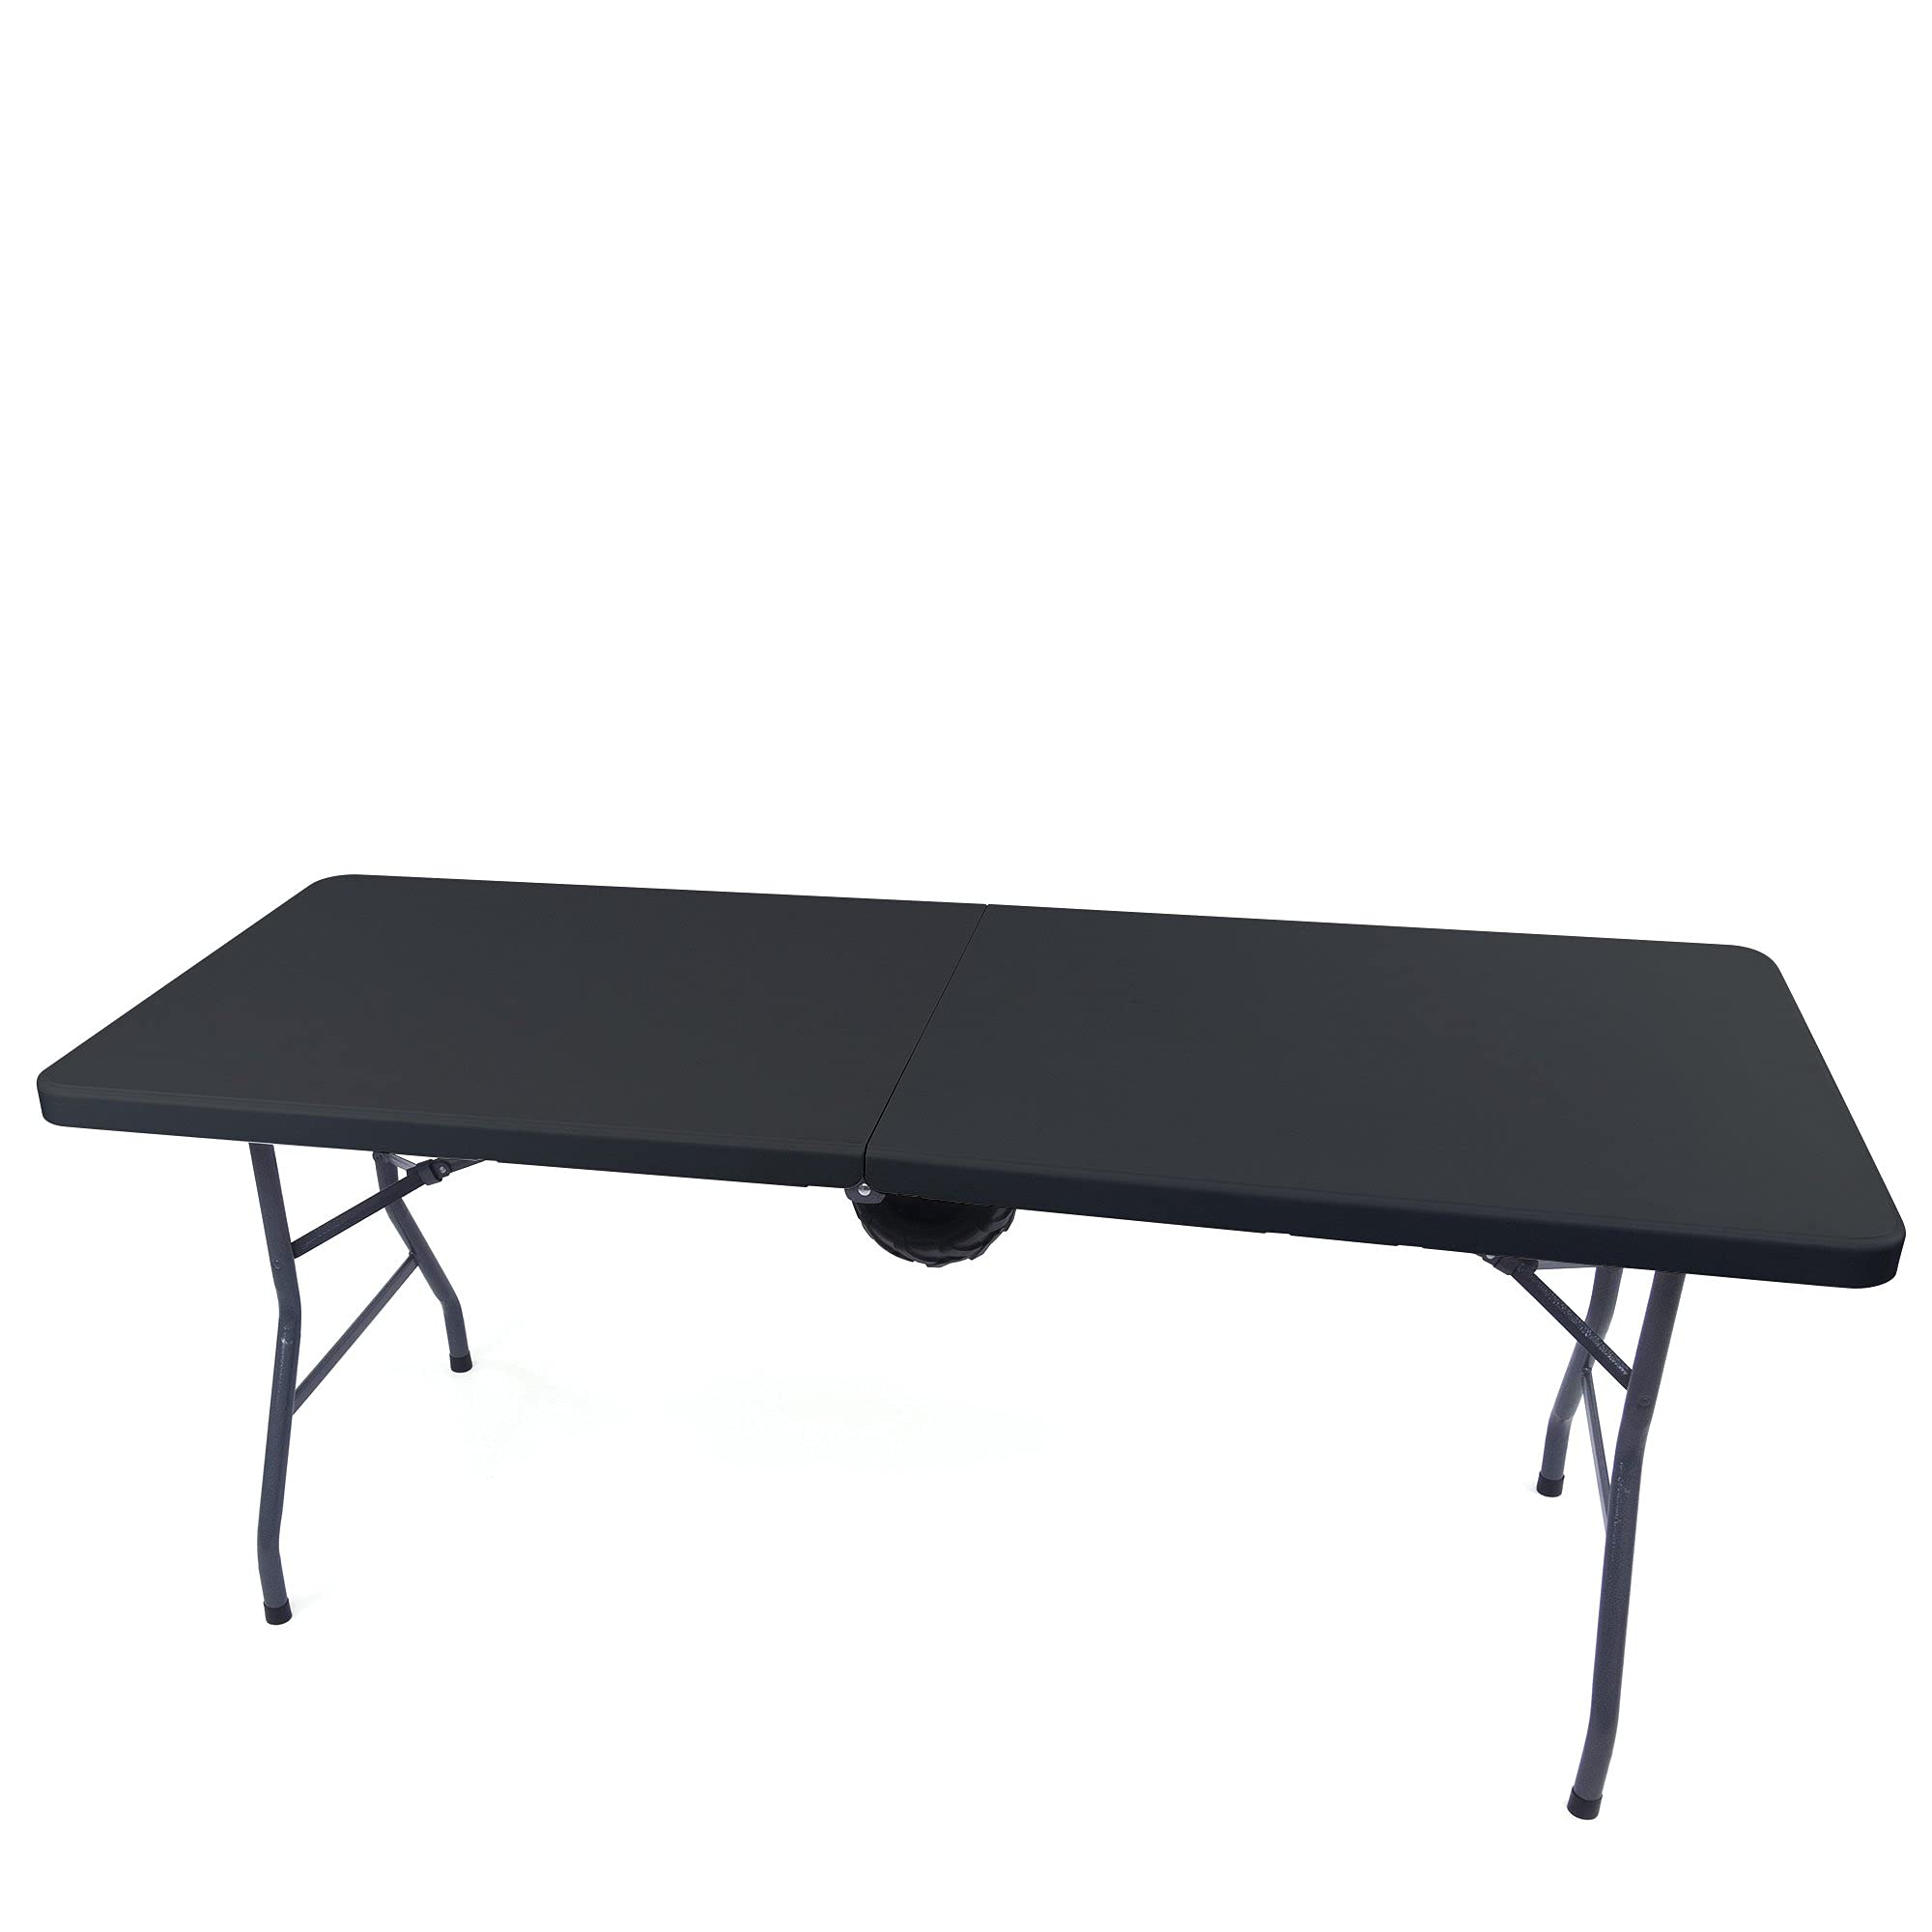 Creative Outdoor Folding Table 6 Ft Built-in Wheels Portable Durable Plastic IndoorOutdoor Events Holds up to 4 Chairs